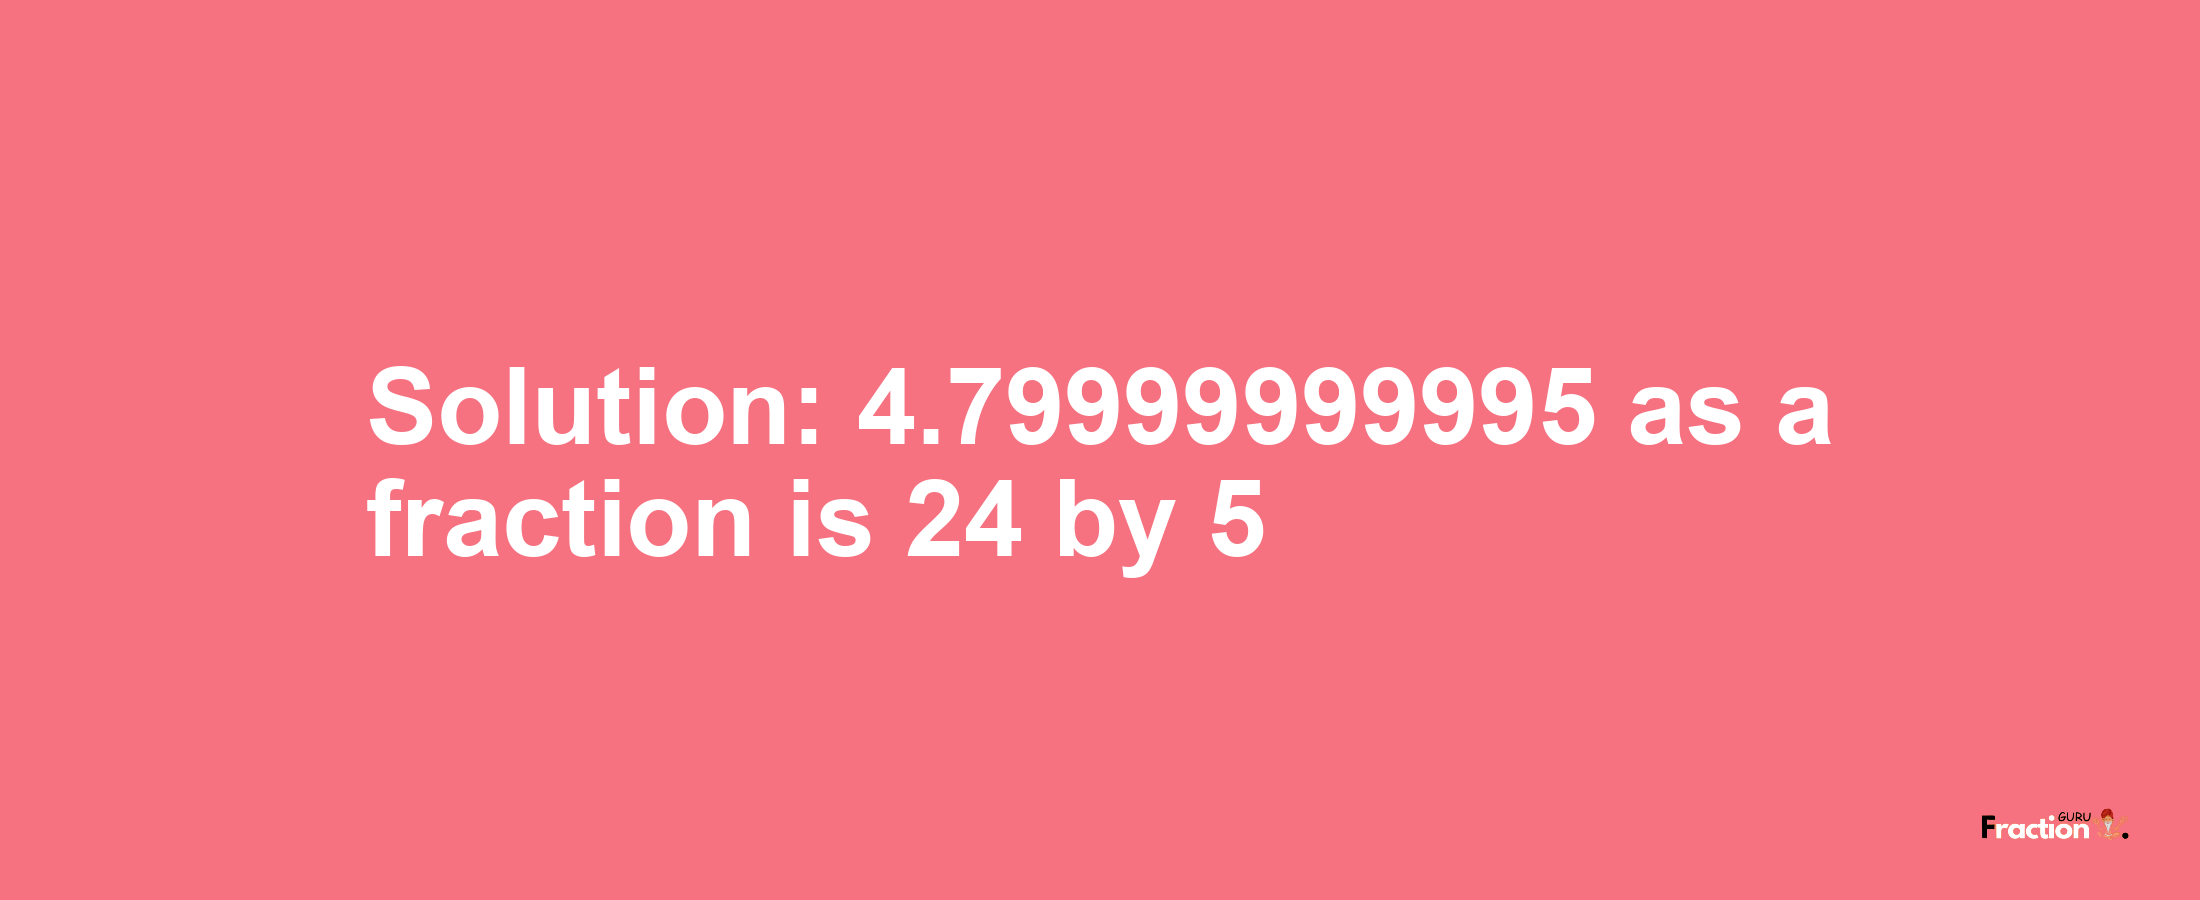 Solution:4.79999999995 as a fraction is 24/5